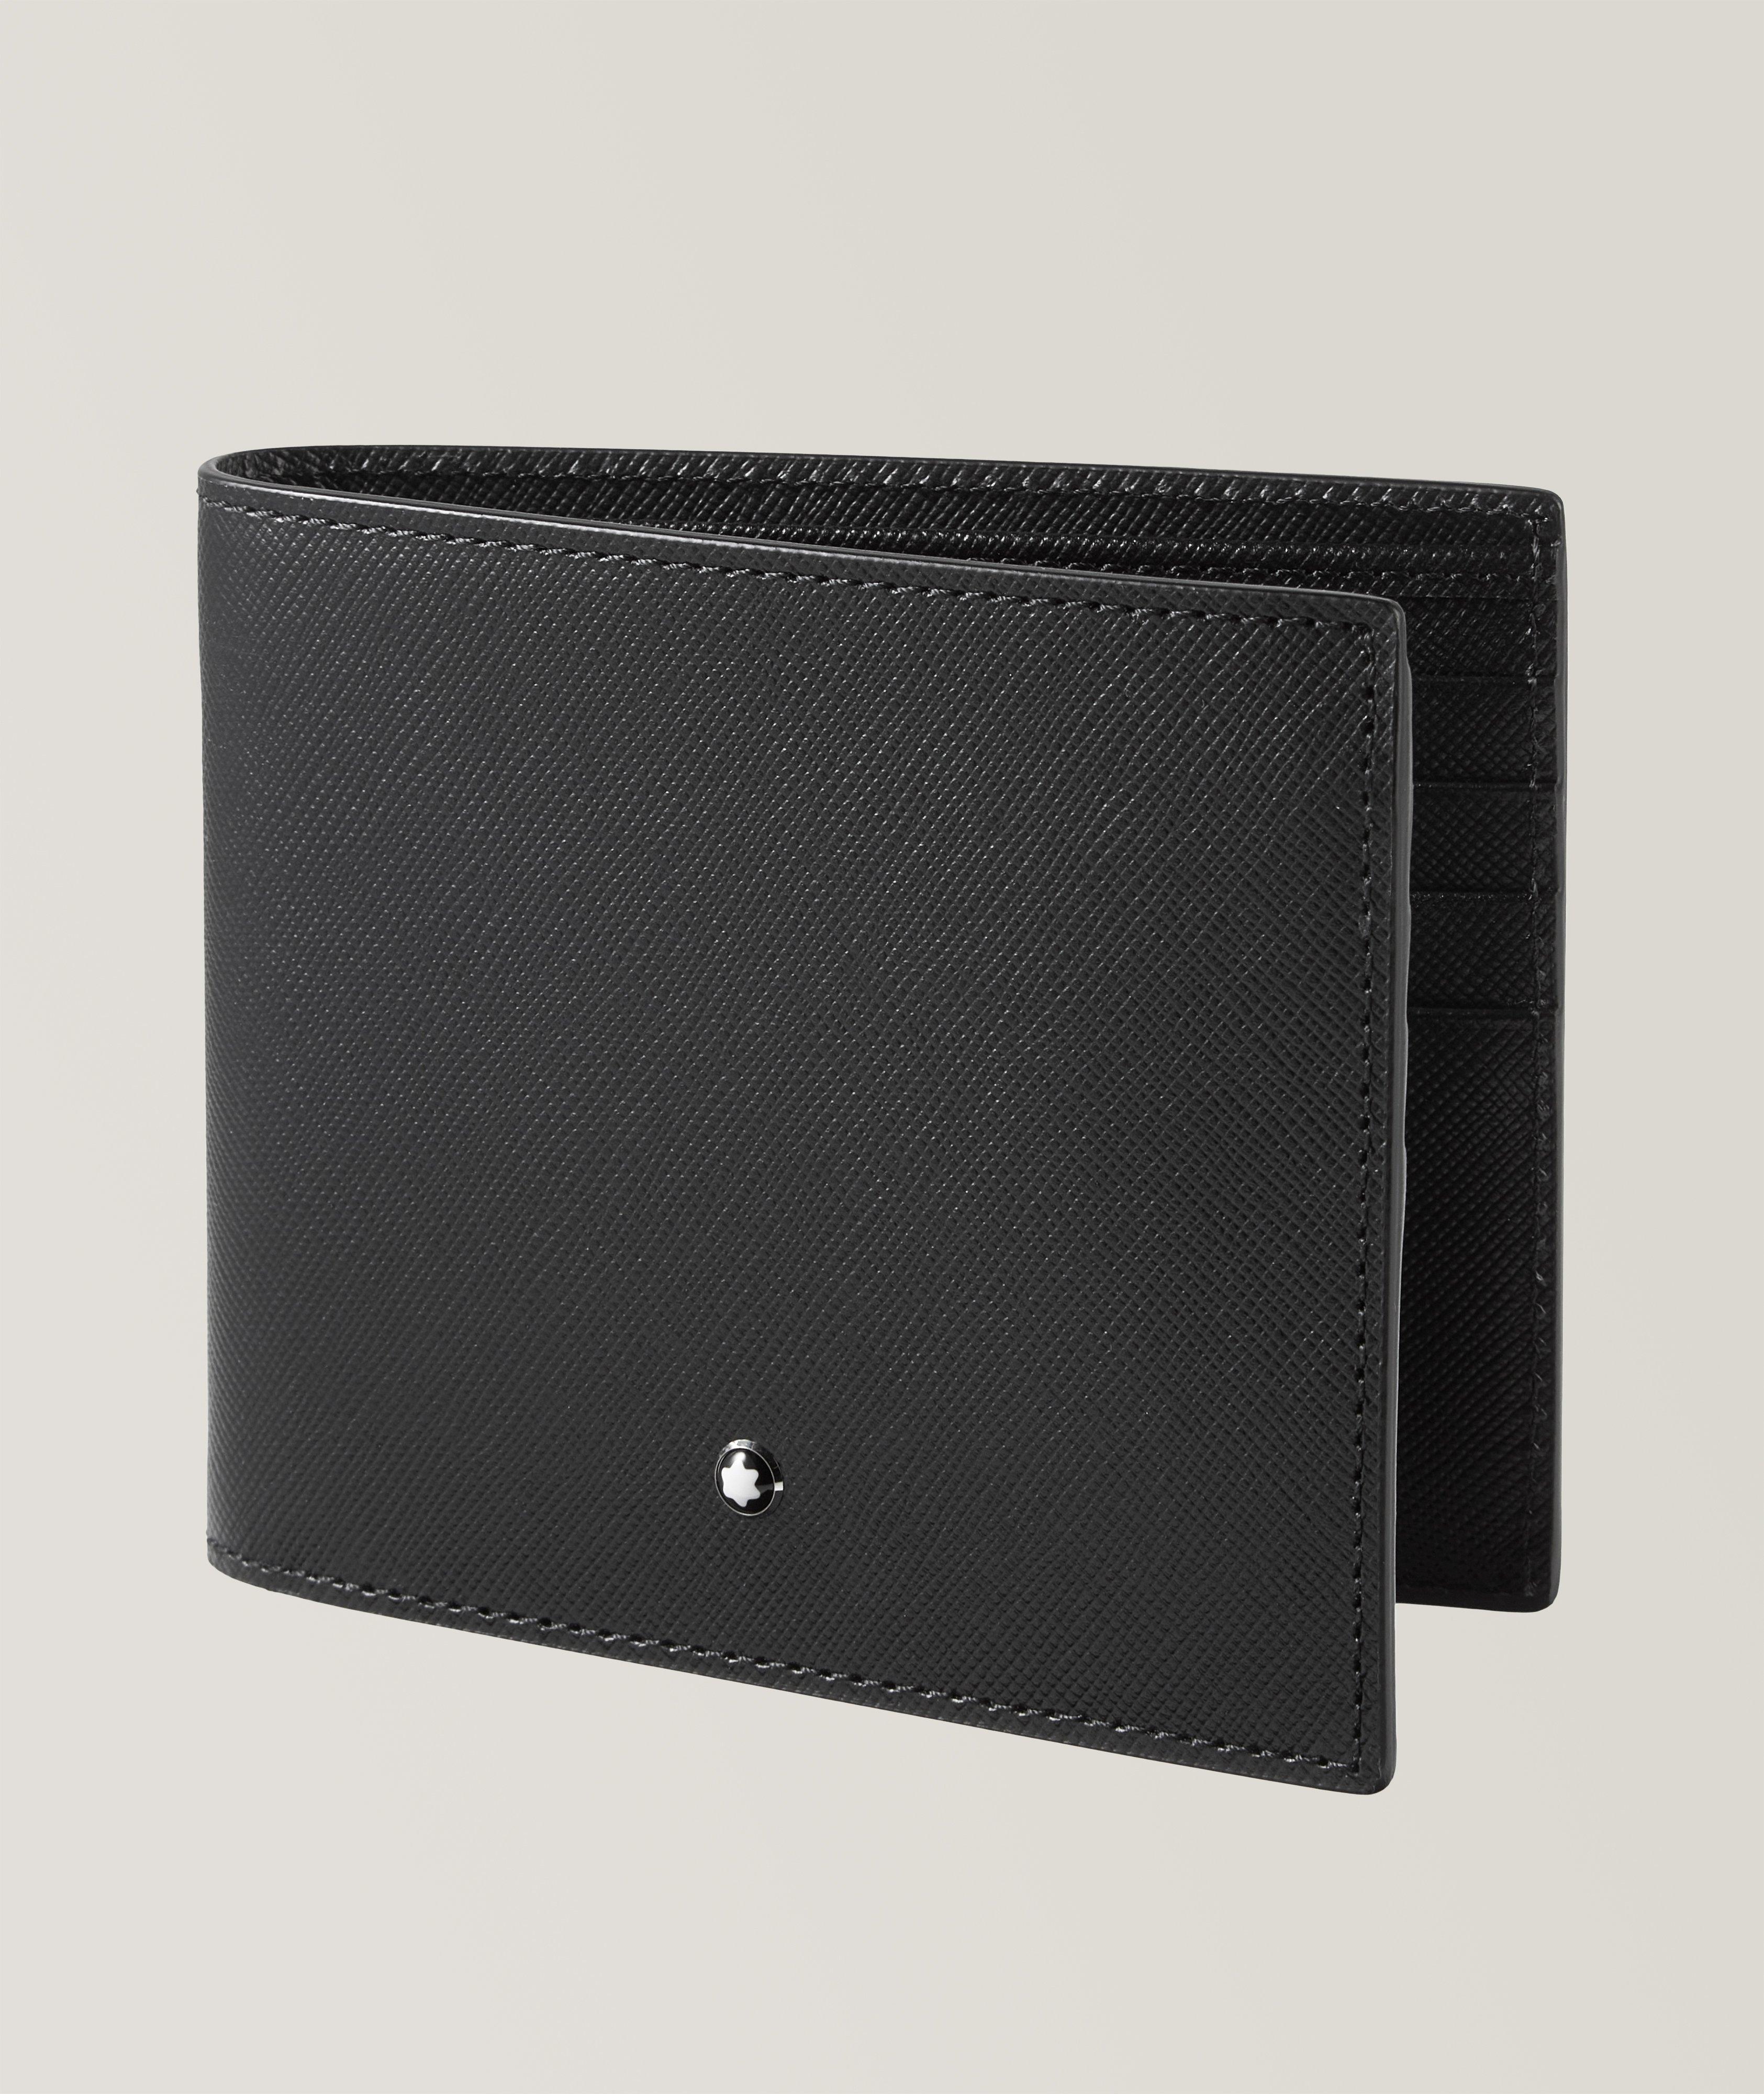 Sartorial Leather Wallet image 0